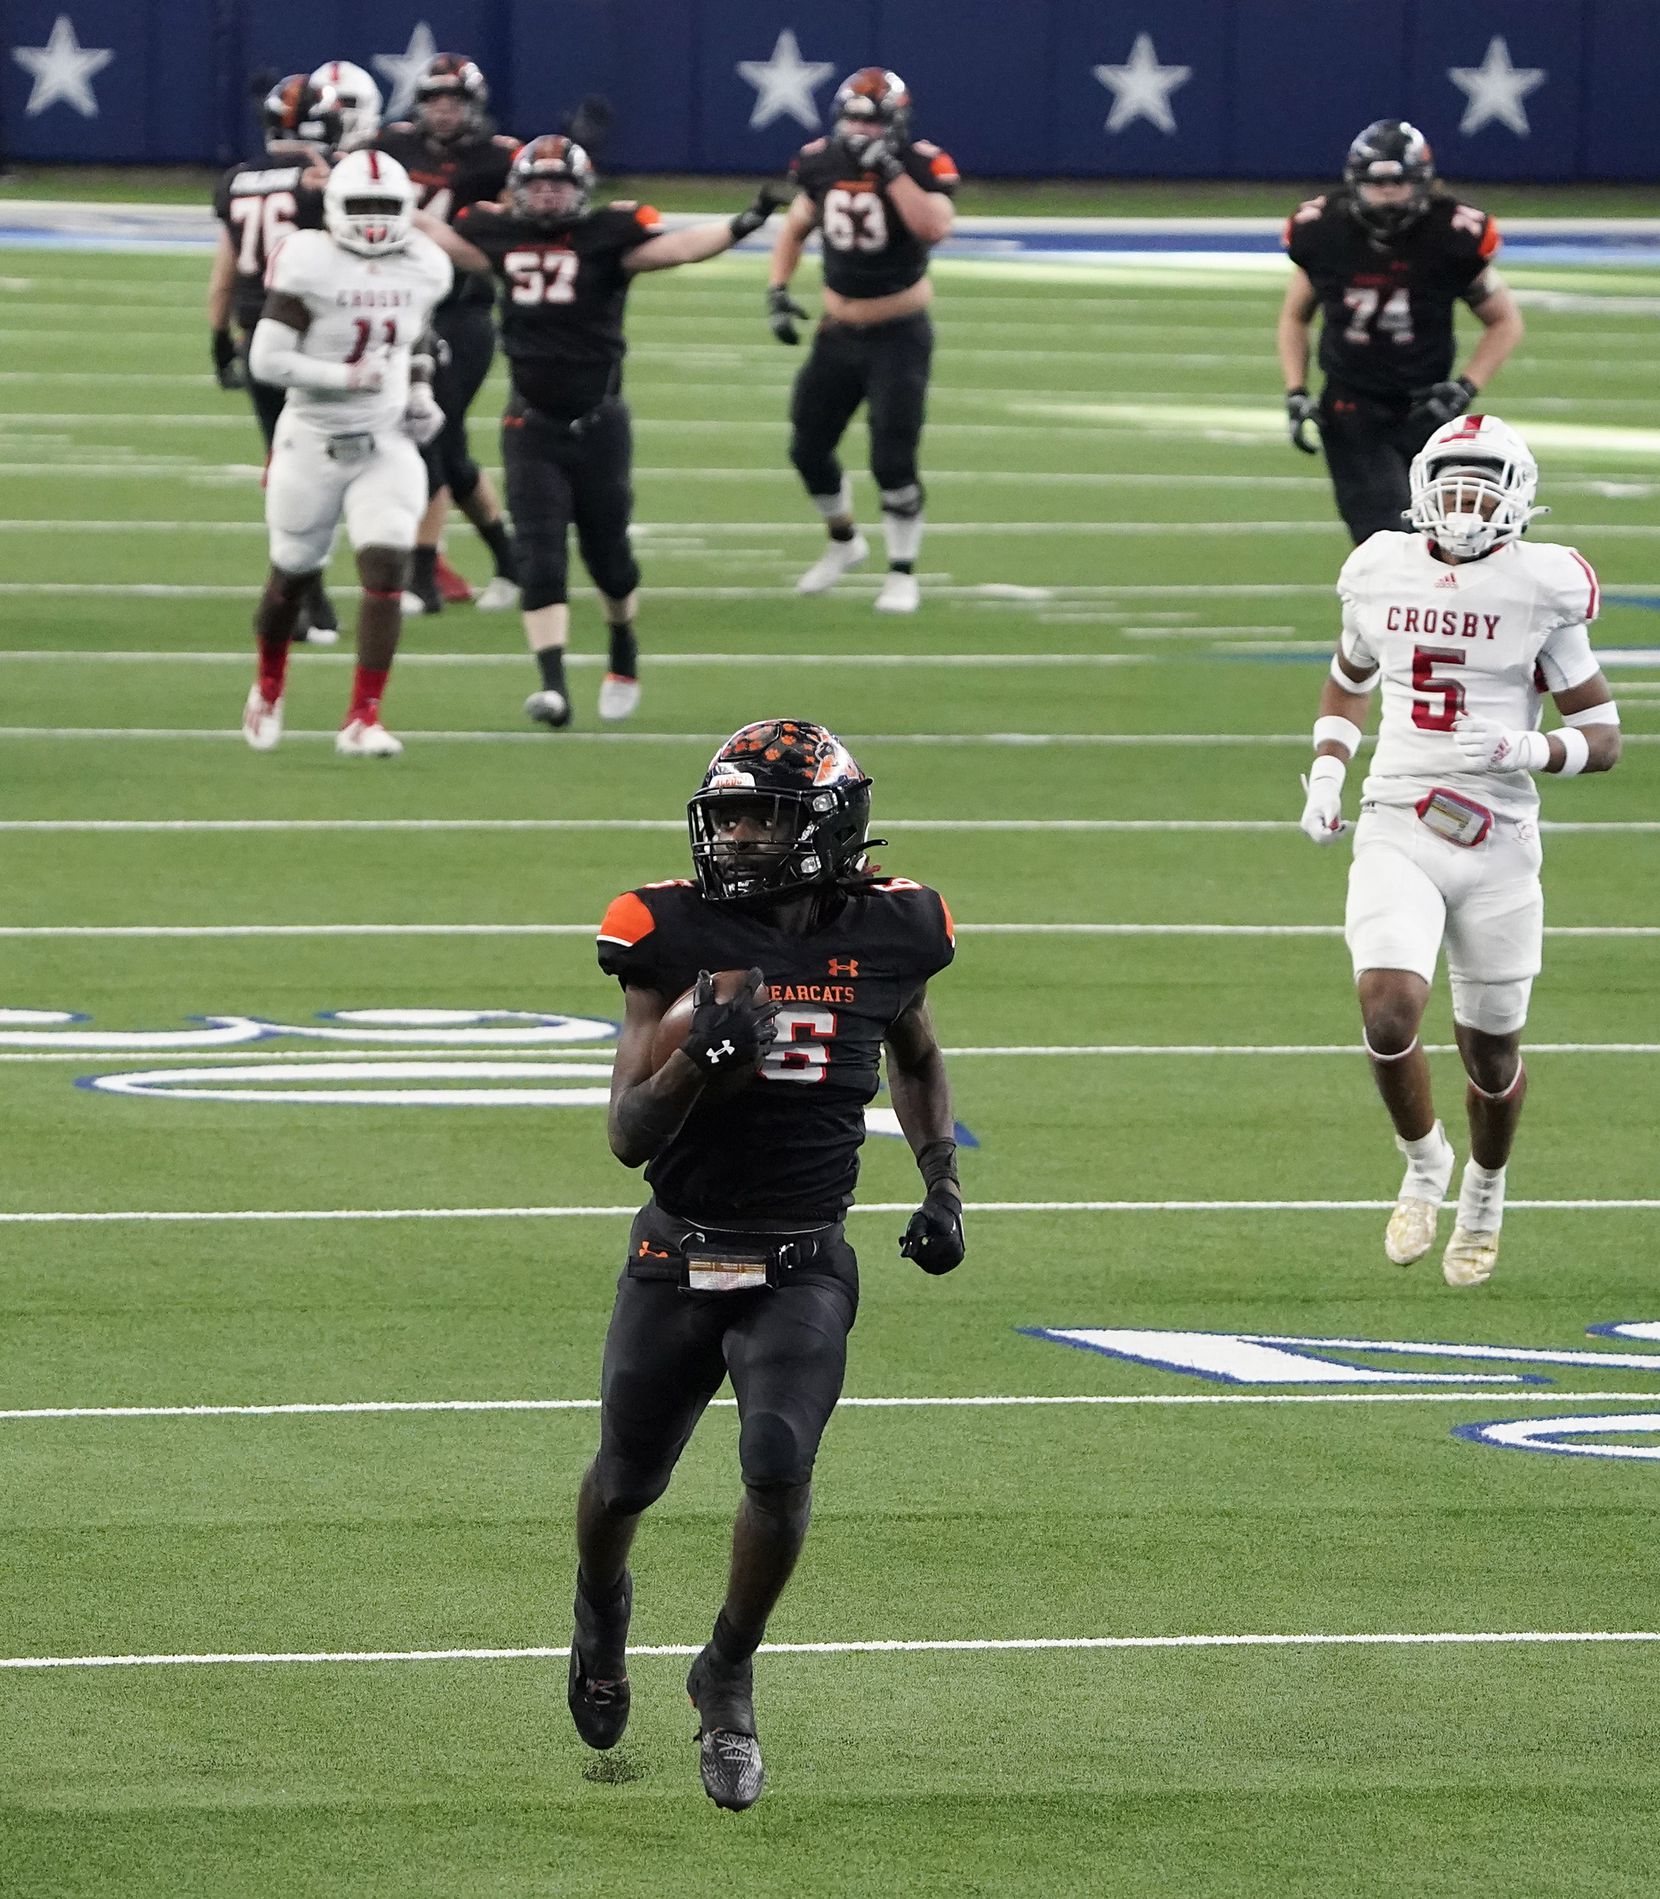 Aledo running back DeMarco Roberts (6) races through the defense on a 54-yard touchdown run during the second half of a 56-21 victory over Crosby to win the Class 5A Division II state football championship game at AT&T Stadium on Friday, Jan. 15, 2021, in Arlington. The victory gave the Bearcats the 10th state championship in school history. (Smiley N. Pool/The Dallas Morning News)